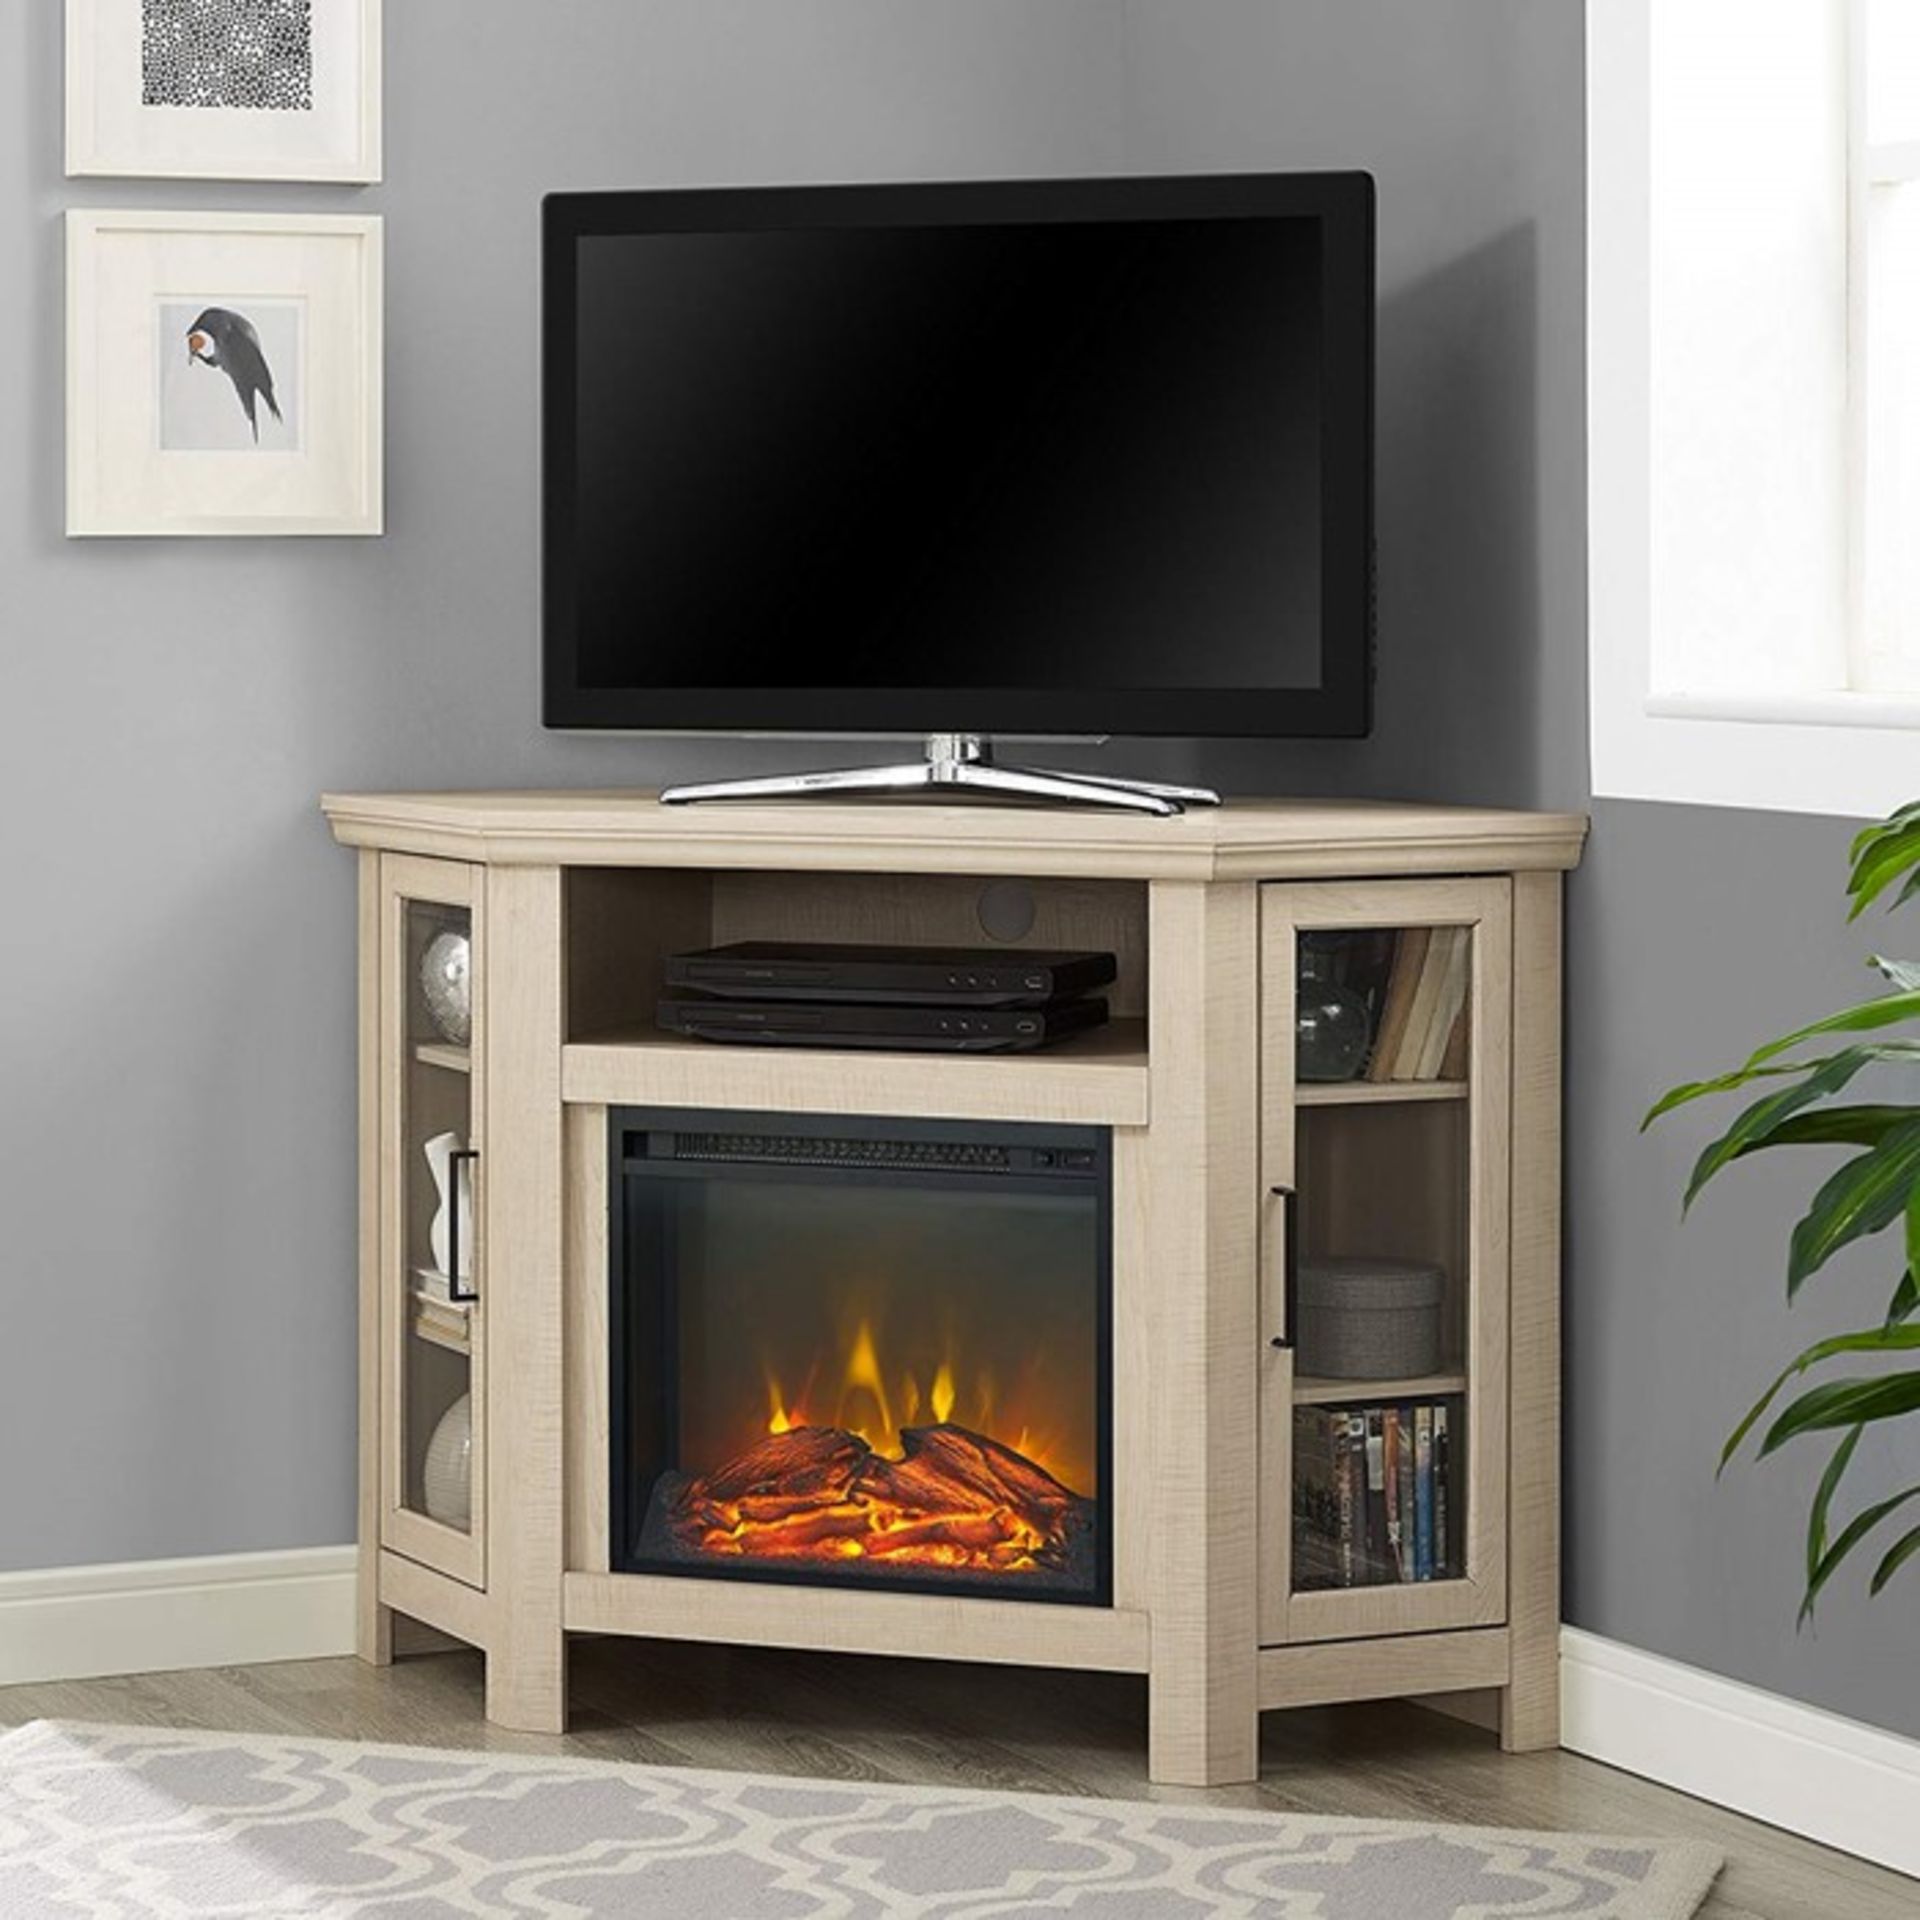 1 GRADE A BOXED WOOD CORNER FIREPLACE TV STAND - MPLE - W48FPCRMP-UK / SIZE 48" / RRP £339.99 (